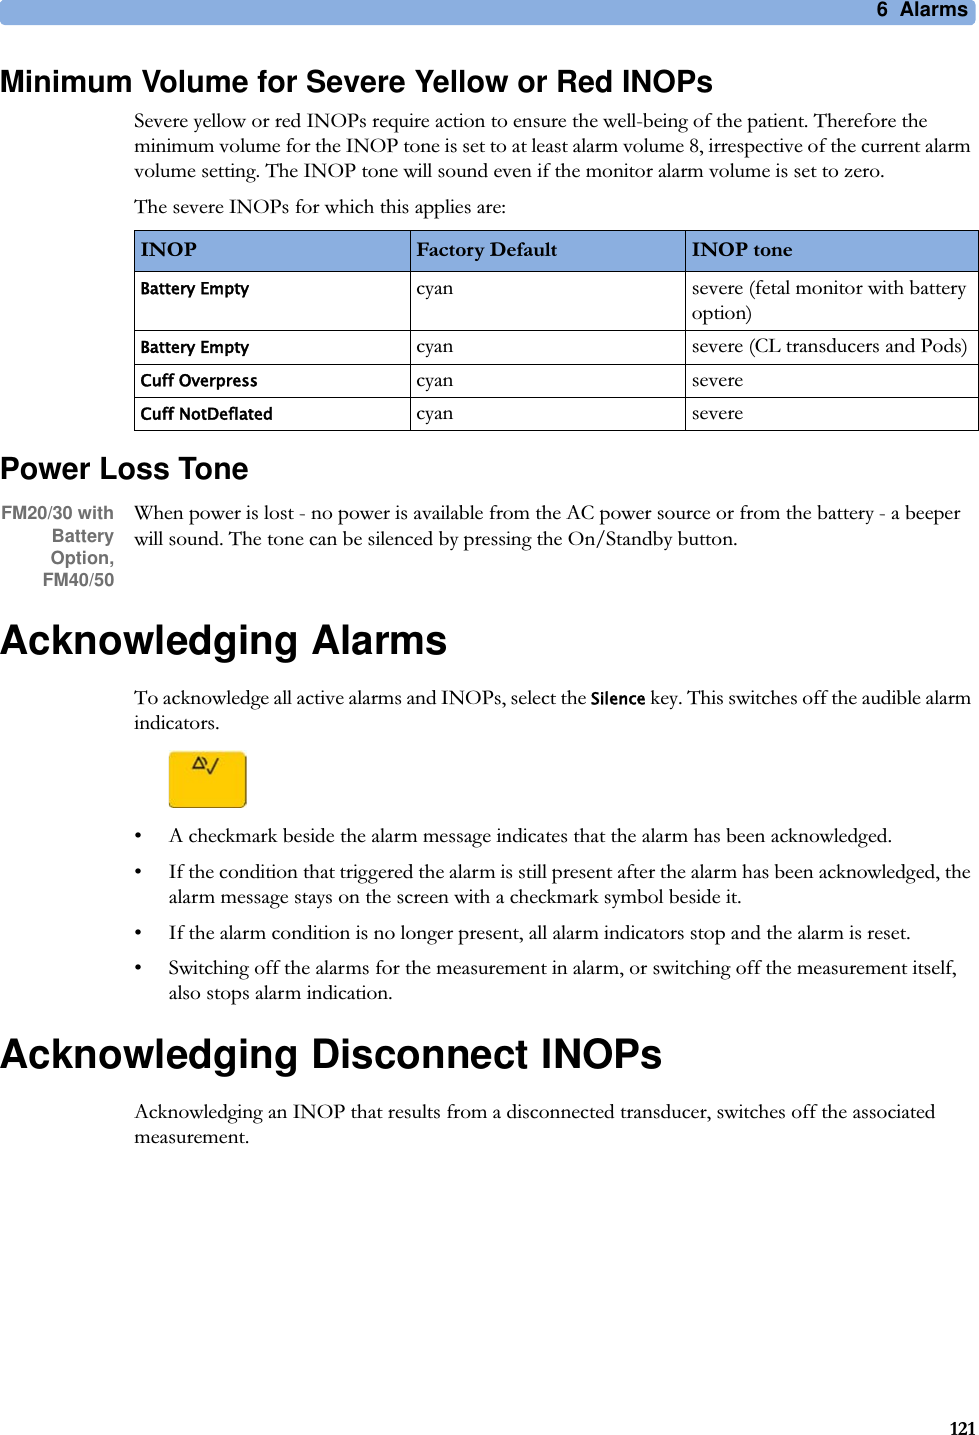 6  Alarms121Minimum Volume for Severe Yellow or Red INOPsSevere yellow or red INOPs require action to ensure the well-being of the patient. Therefore the minimum volume for the INOP tone is set to at least alarm volume 8, irrespective of the current alarm volume setting. The INOP tone will sound even if the monitor alarm volume is set to zero.The severe INOPs for which this applies are:Power Loss ToneFM20/30 with BatteryOption,FM40/50When power is lost - no power is available from the AC power source or from the battery - a beeper will sound. The tone can be silenced by pressing the On/Standby button.Acknowledging AlarmsTo acknowledge all active alarms and INOPs, select the Silence key. This switches off the audible alarm indicators.• A checkmark beside the alarm message indicates that the alarm has been acknowledged.• If the condition that triggered the alarm is still present after the alarm has been acknowledged, the alarm message stays on the screen with a checkmark symbol beside it.• If the alarm condition is no longer present, all alarm indicators stop and the alarm is reset.• Switching off the alarms for the measurement in alarm, or switching off the measurement itself, also stops alarm indication.Acknowledging Disconnect INOPsAcknowledging an INOP that results from a disconnected transducer, switches off the associated measurement.INOP Factory Default INOP toneBattery Emptycyan severe (fetal monitor with battery option)Battery Emptycyan severe (CL transducers and Pods)Cuff Overpresscyan severeCuff NotDeflatedcyan severe